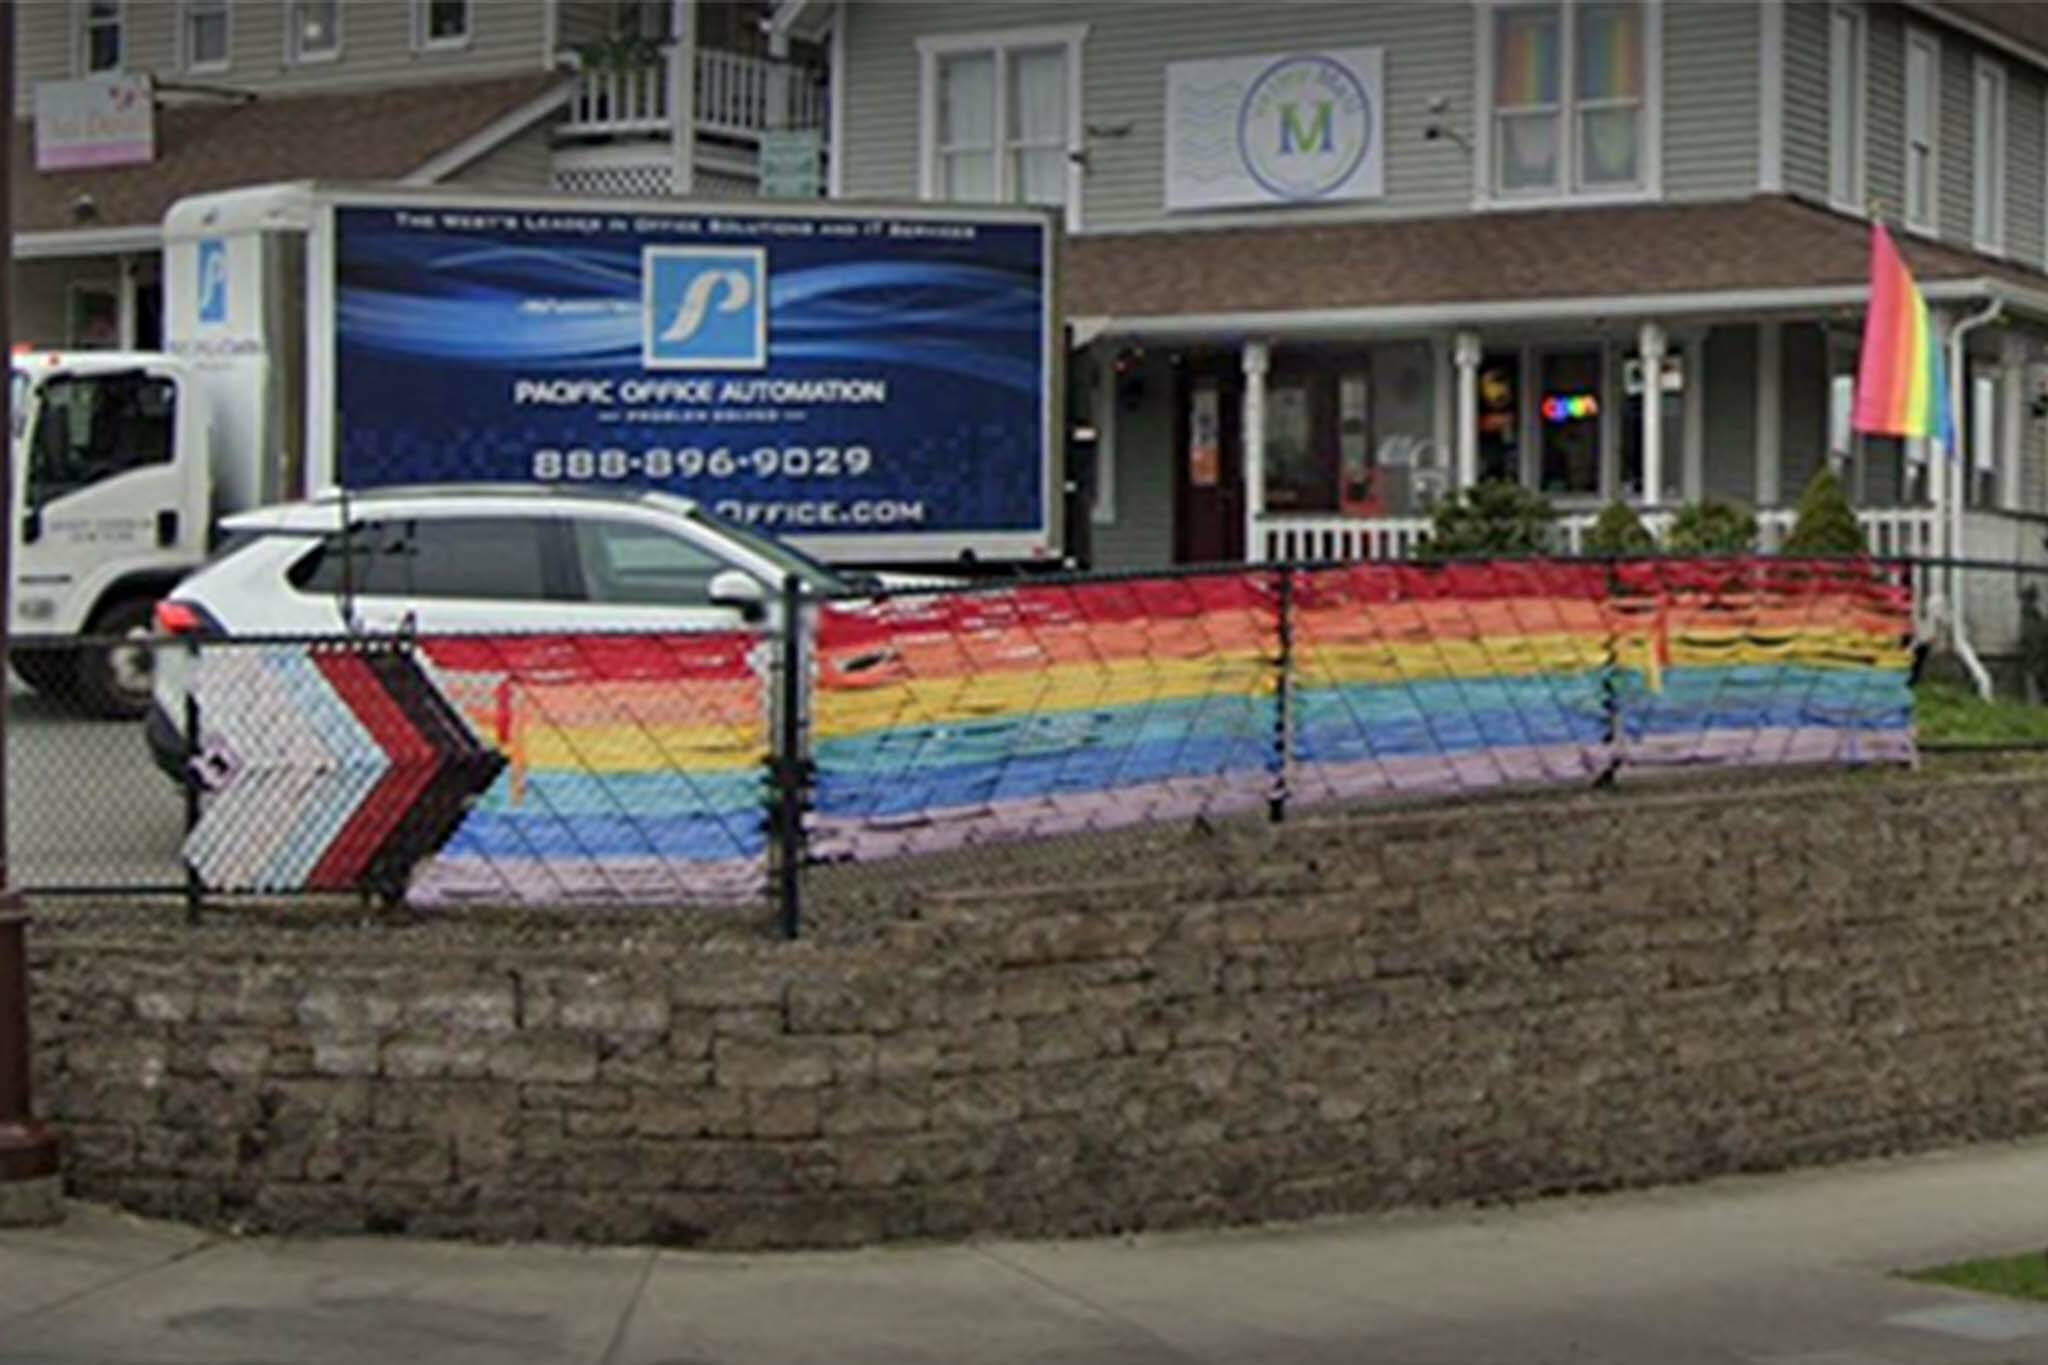 The Pride Wall in Duvall. (Courtesy photo)